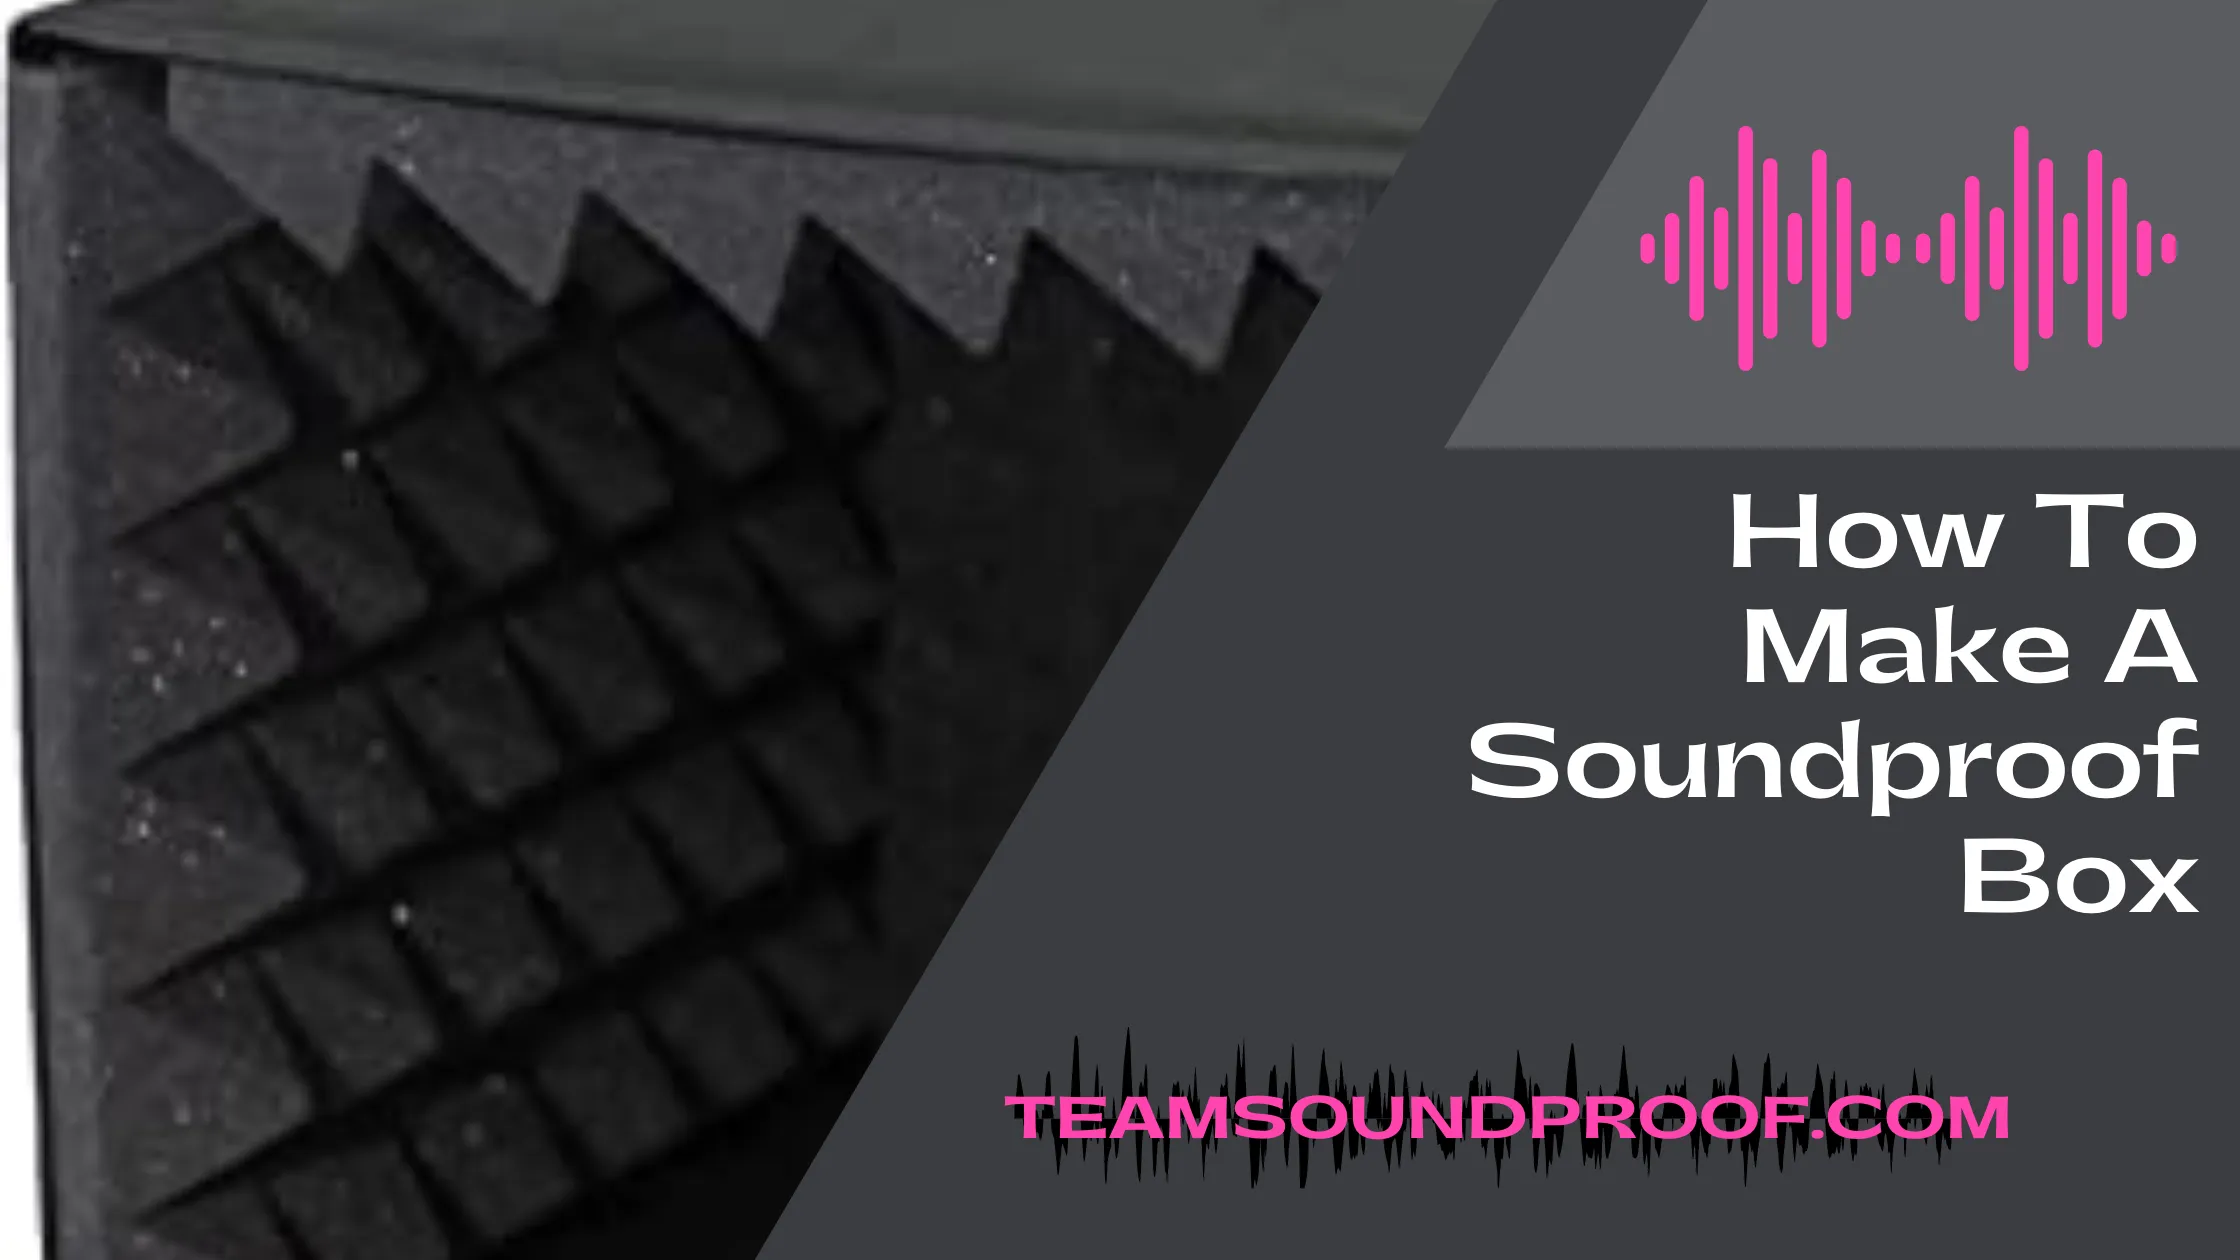 How to Make a Soundproof Box? Simple Guide